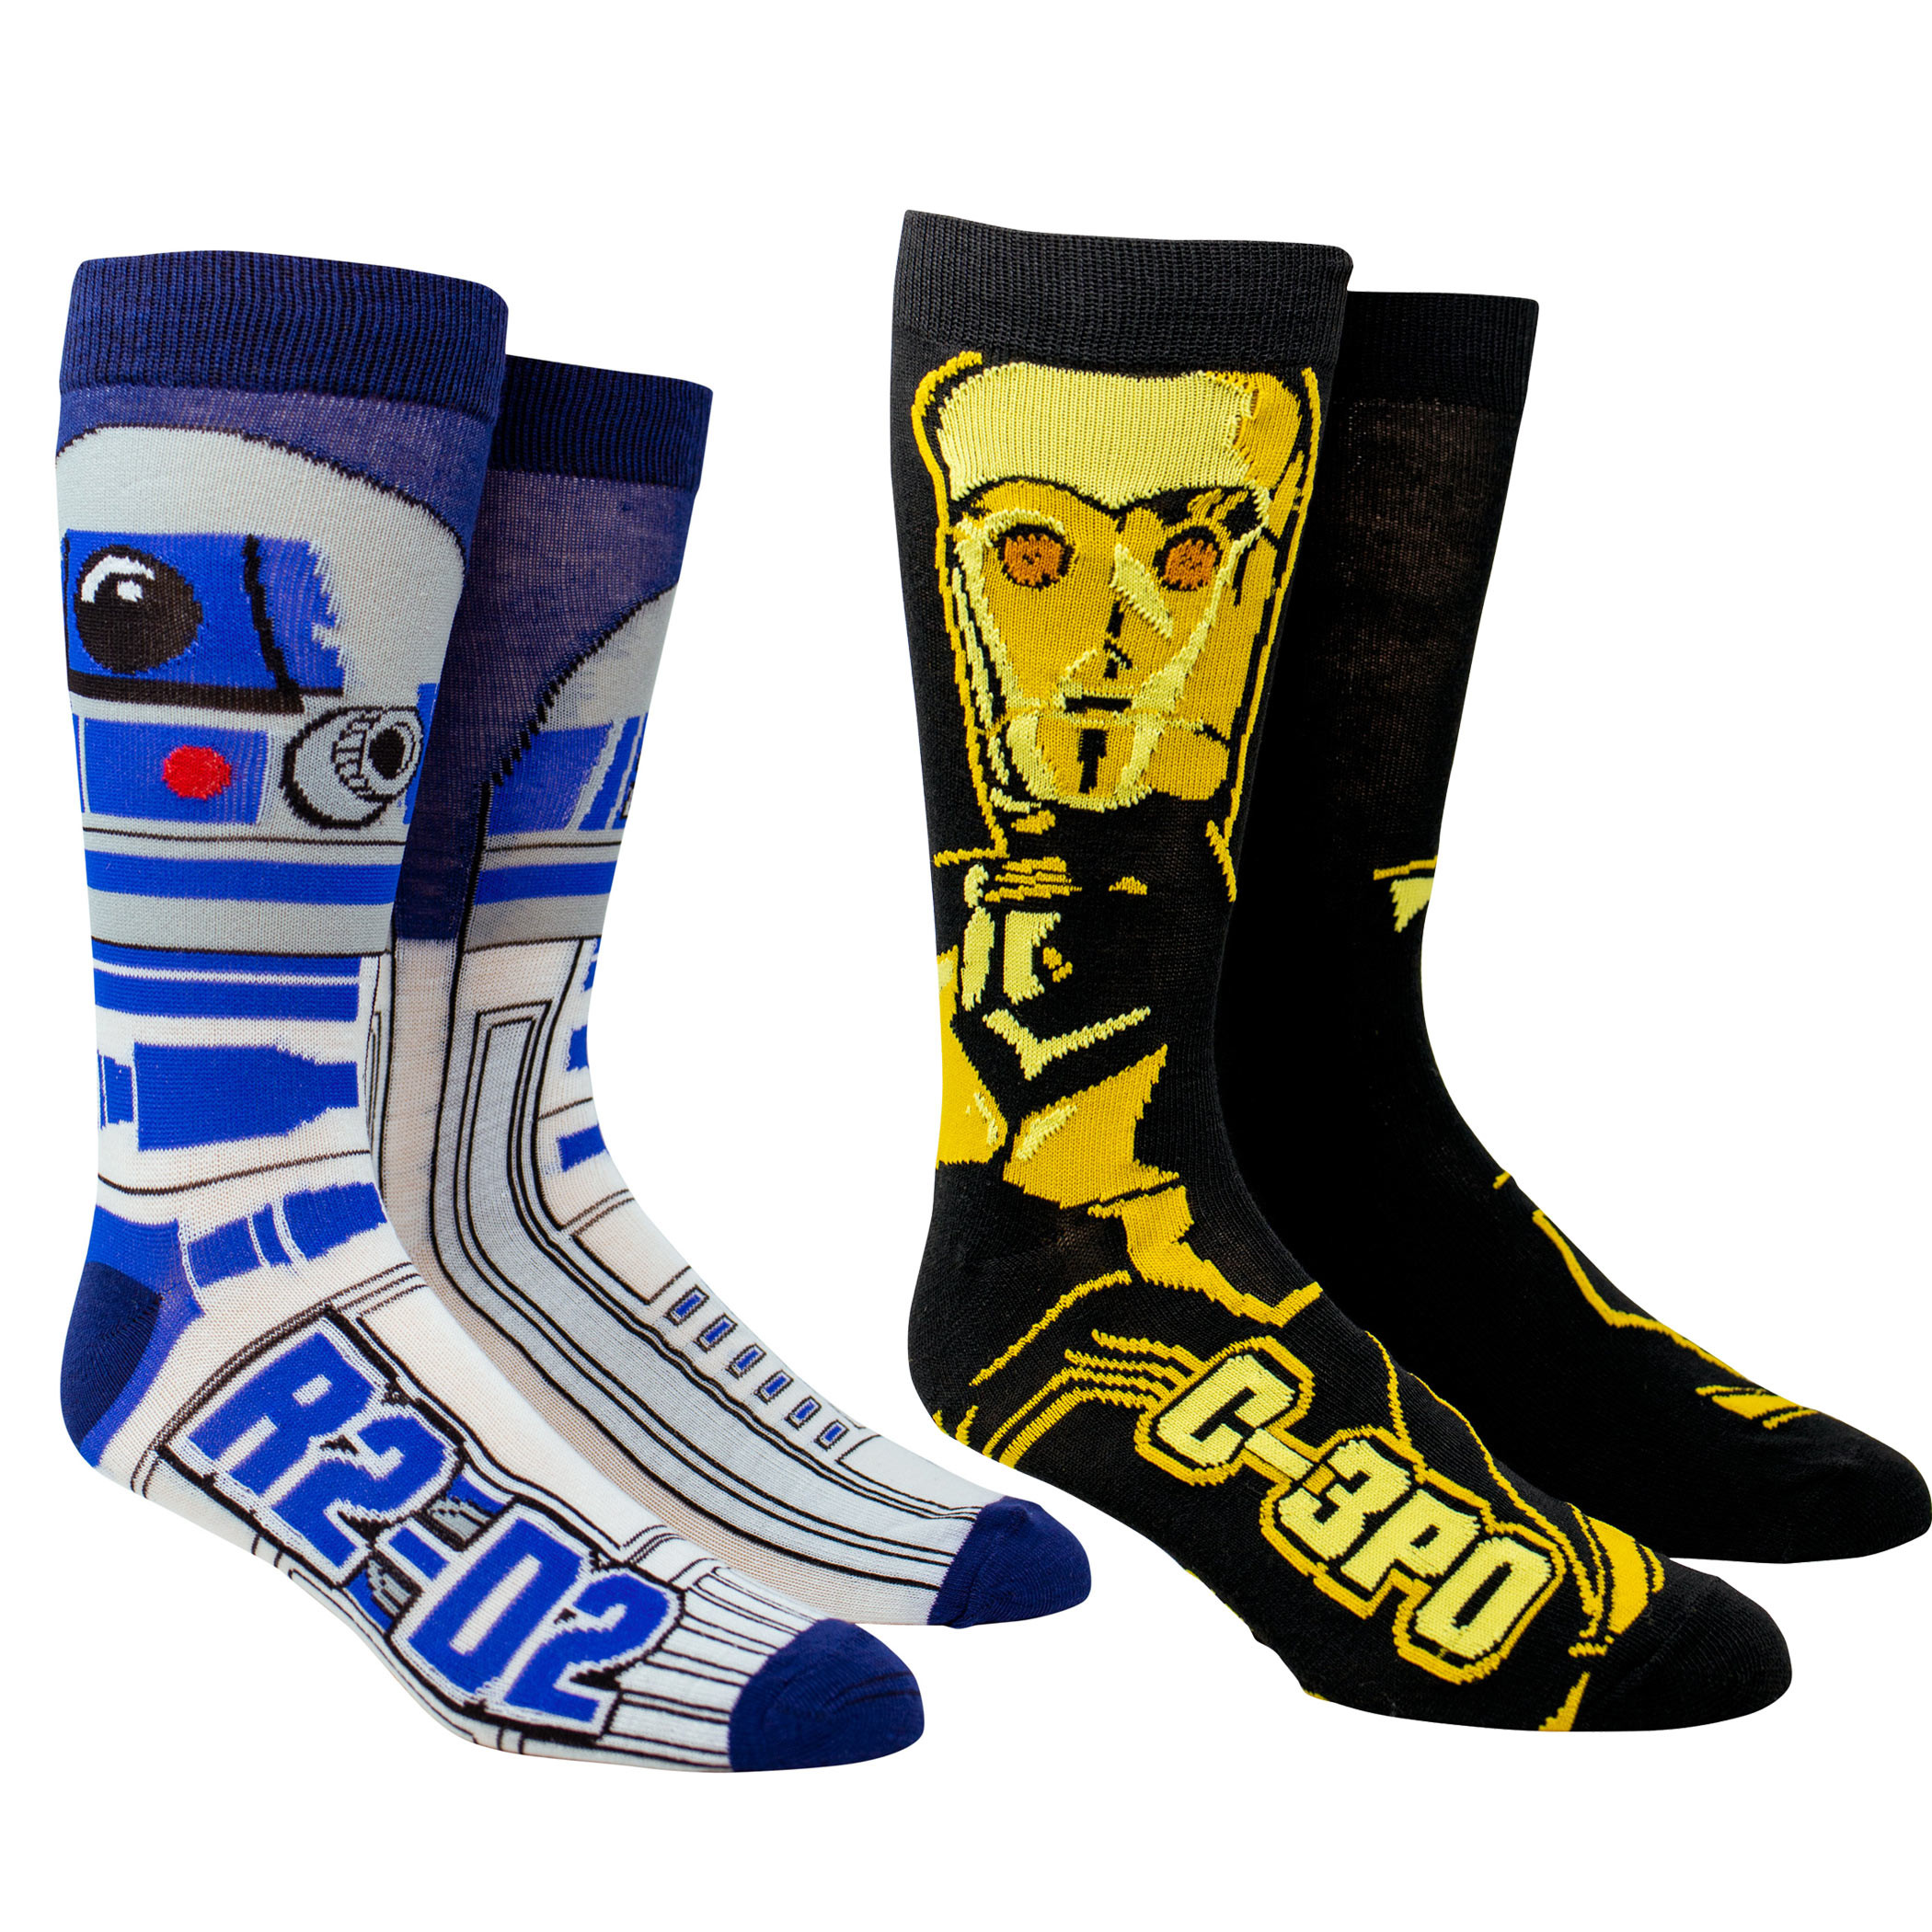 Star Wars R2-D2 and C-3PO Character Crew Socks 2-Pack